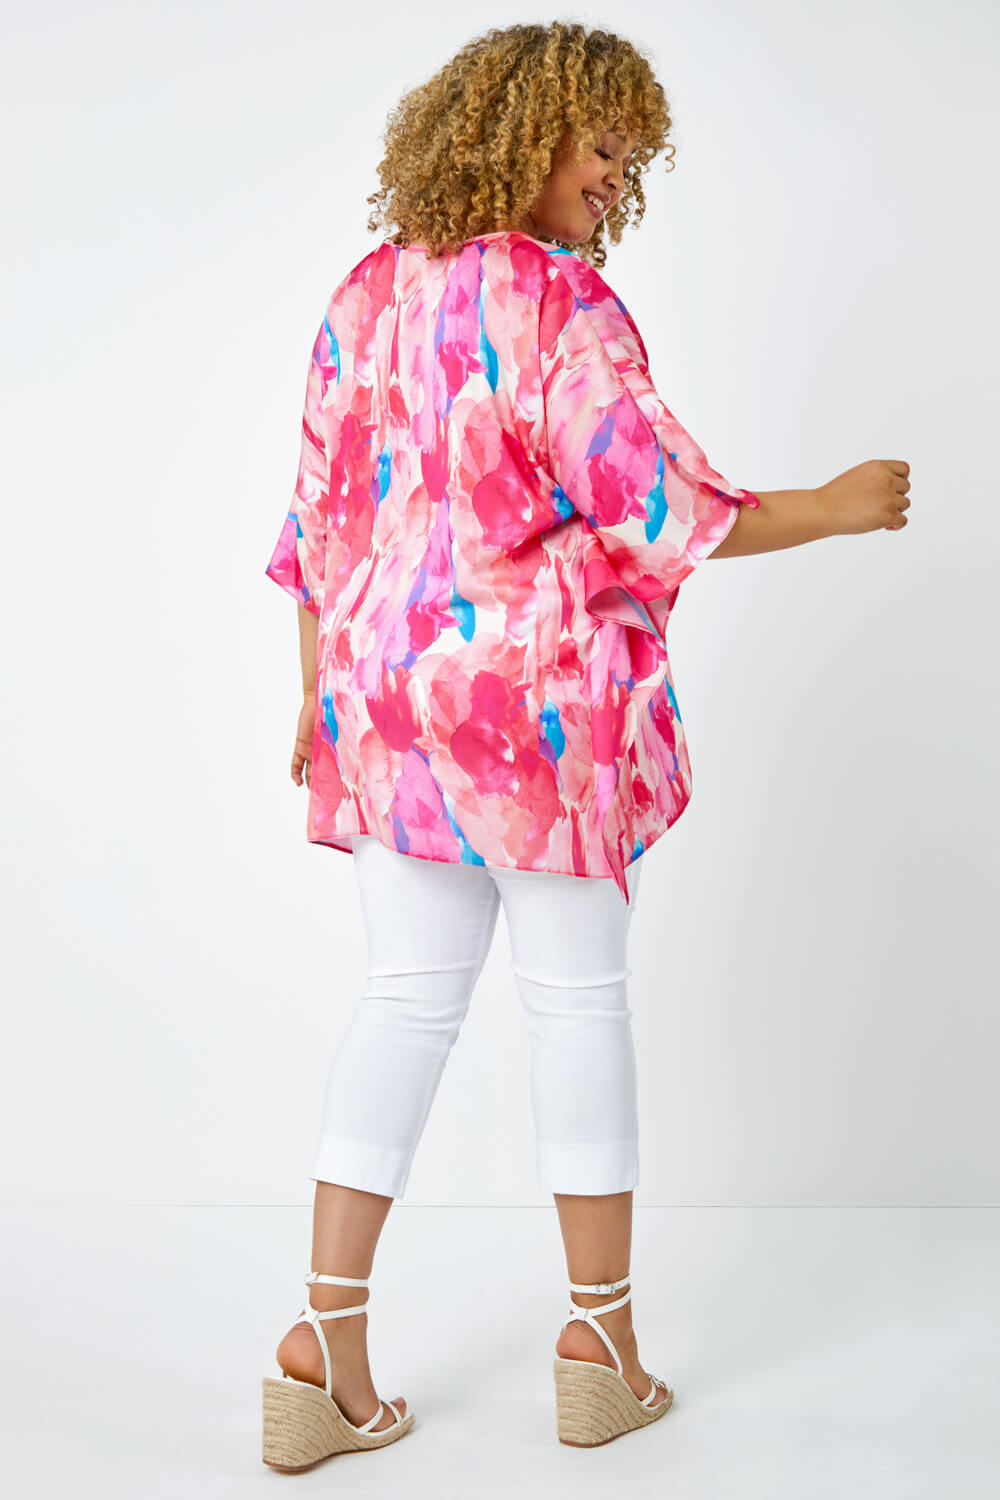 PINK Curve Abstract Print Relaxed Top, Image 3 of 5